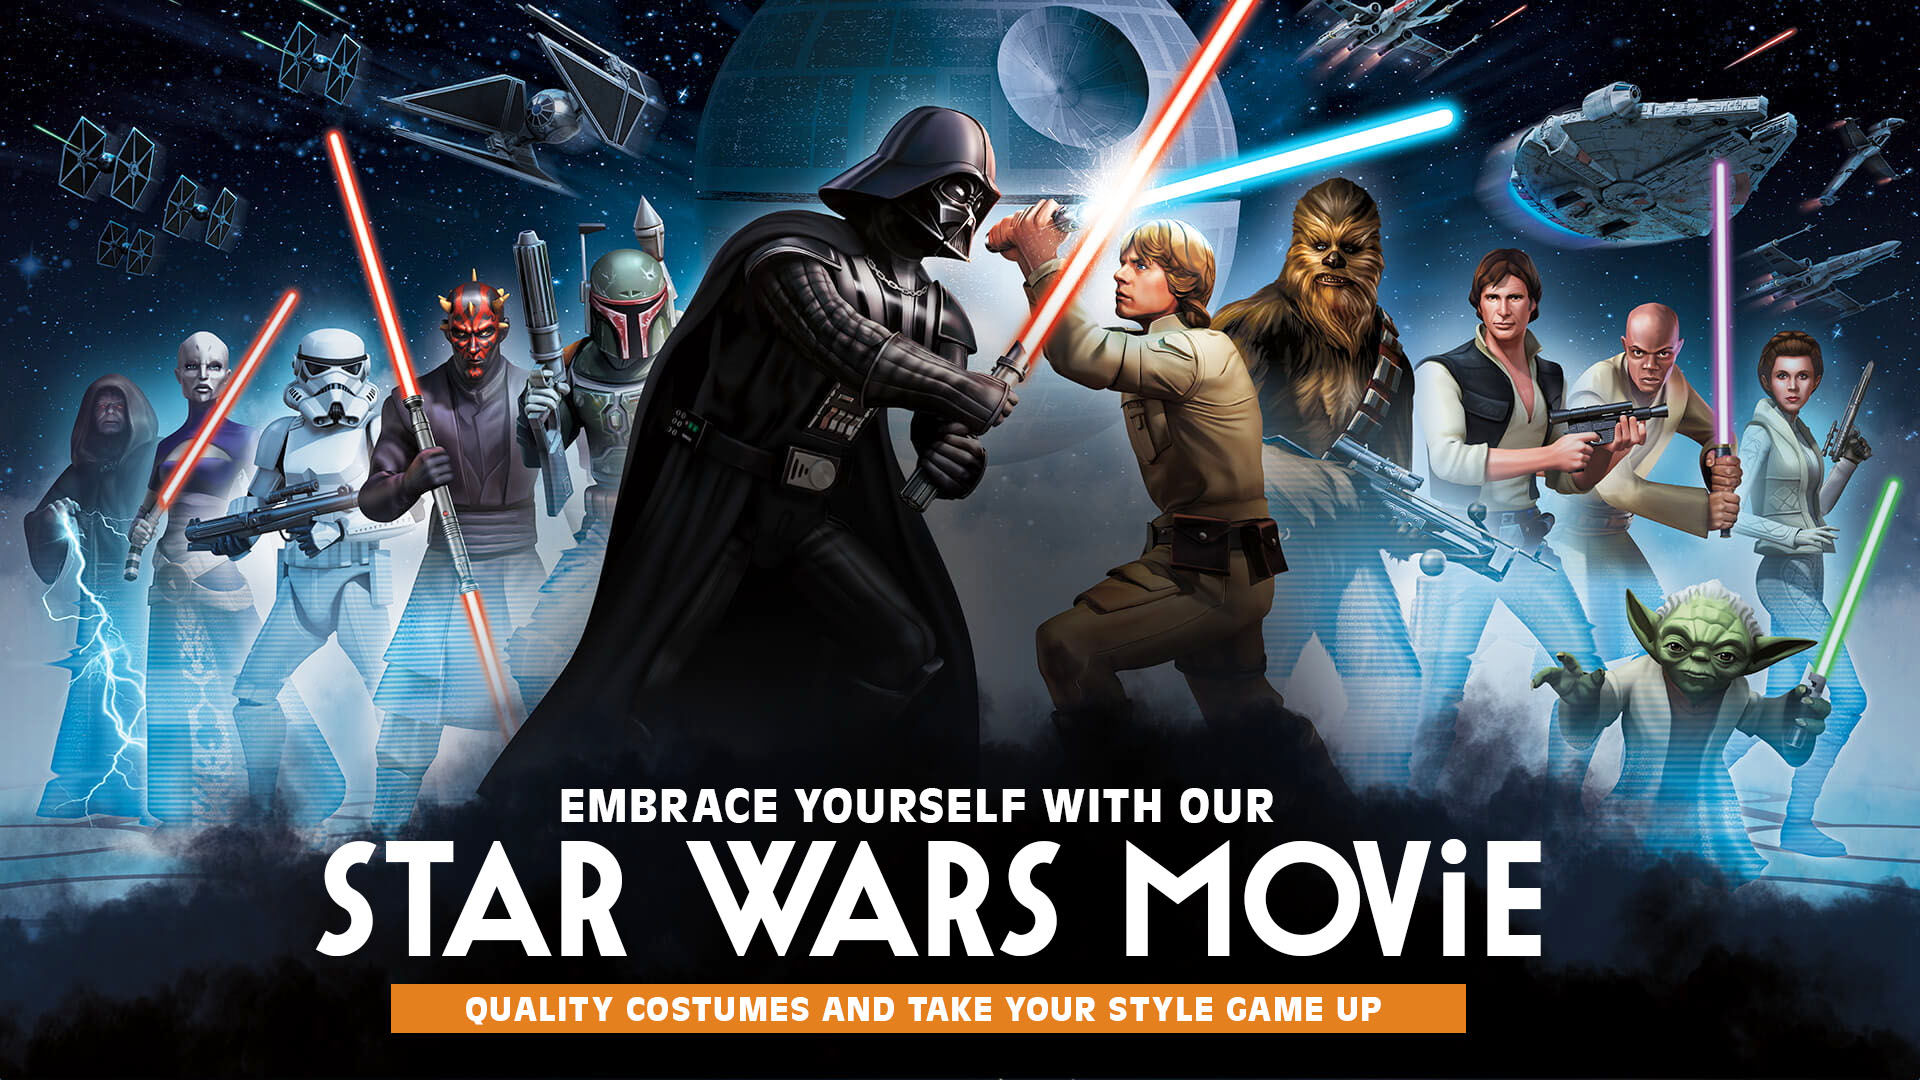 Embrace yourself with our star wars movie quality costumes and take your style game up